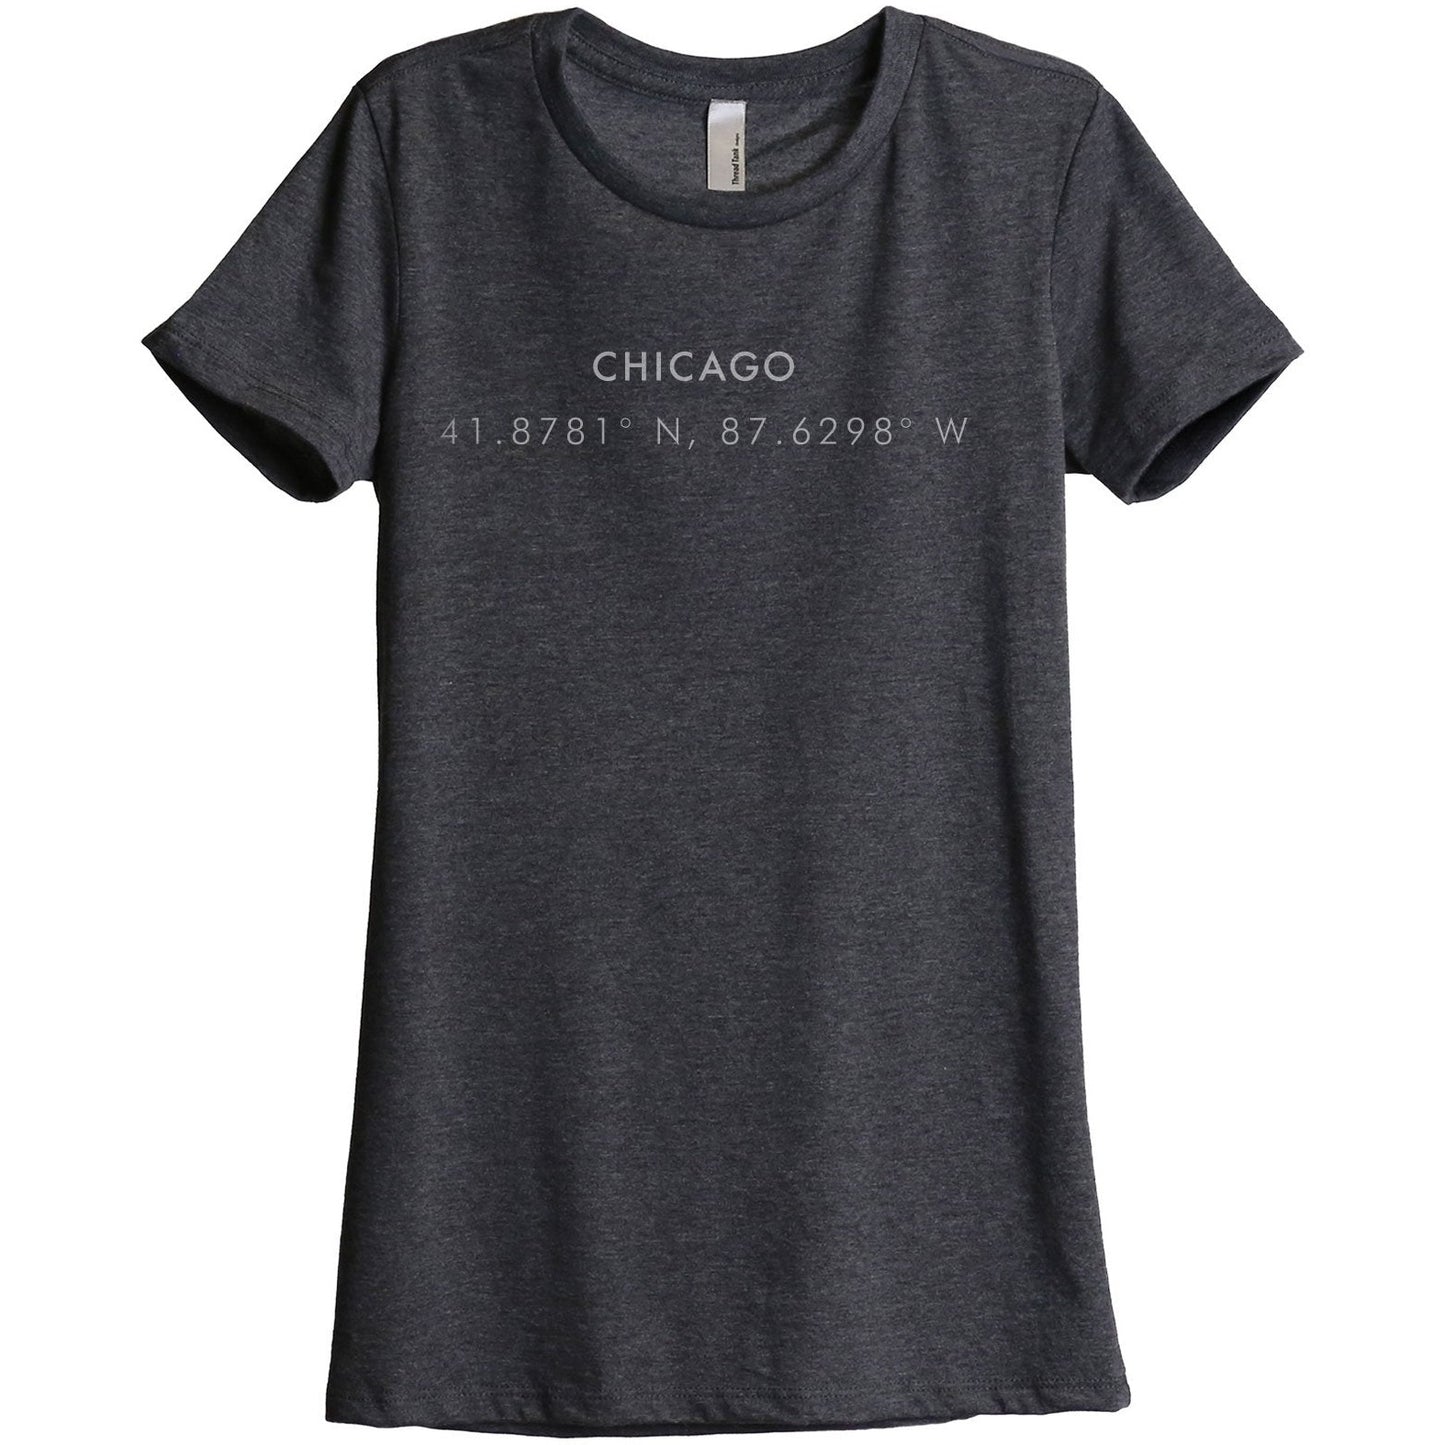 Chicago Illinois Coordinates Women's Relaxed Crewneck T-Shirt Top Tee Charcoal Grey
